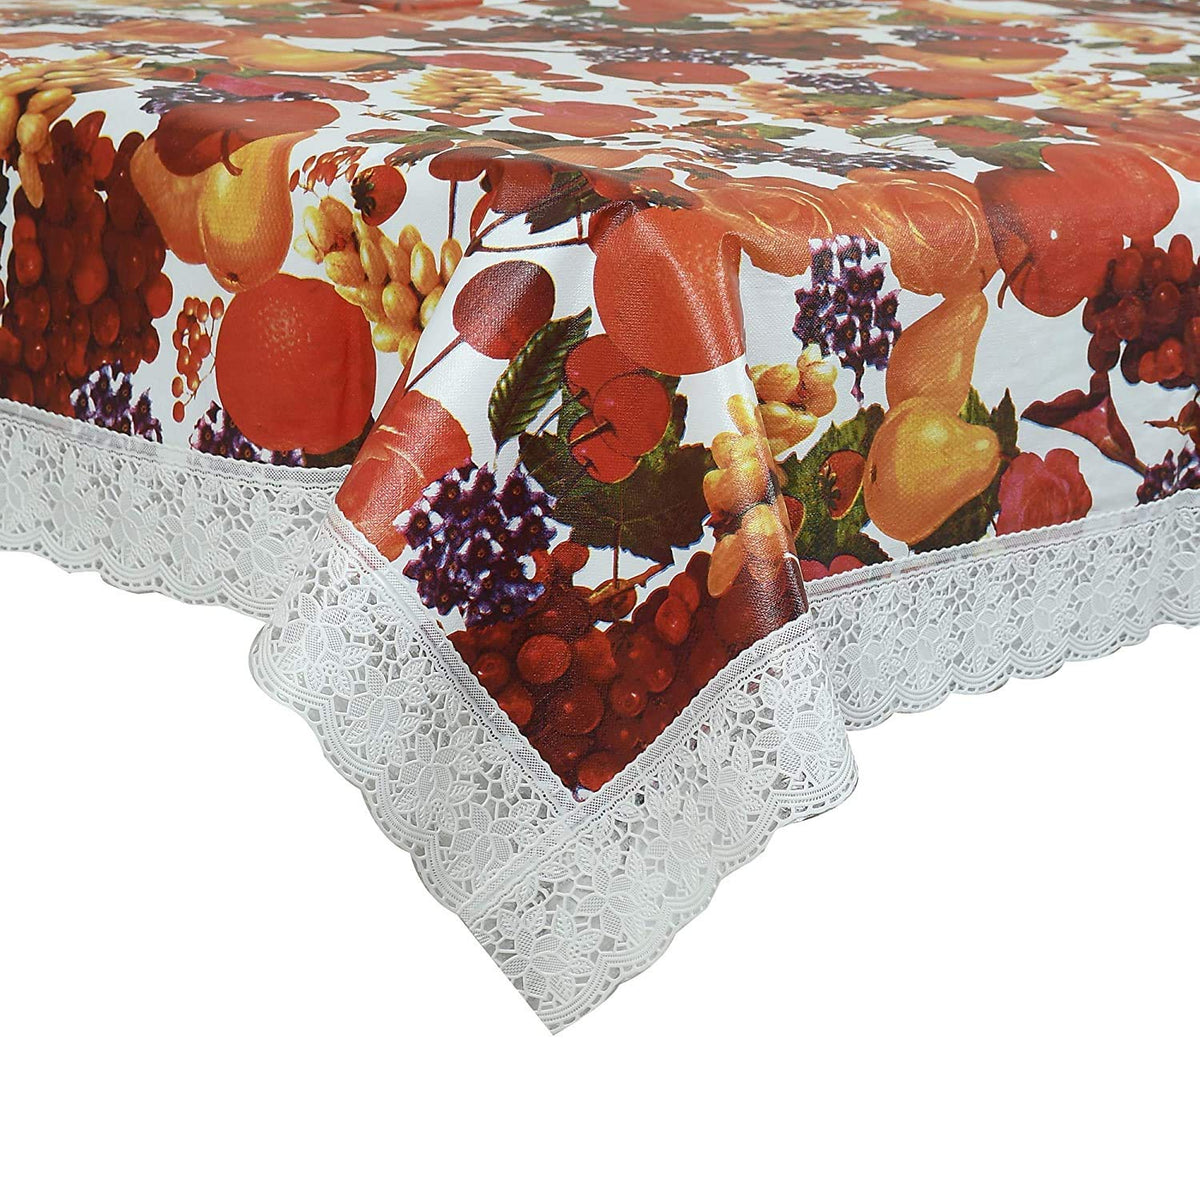 Kuber Industries Dining Table Cover Tablecloth Waterproof Protector 6 Seater with Fruit Printed, 60 X 90 Inches Rectangle (Red), Standard (HS_36_KUBMART019101)